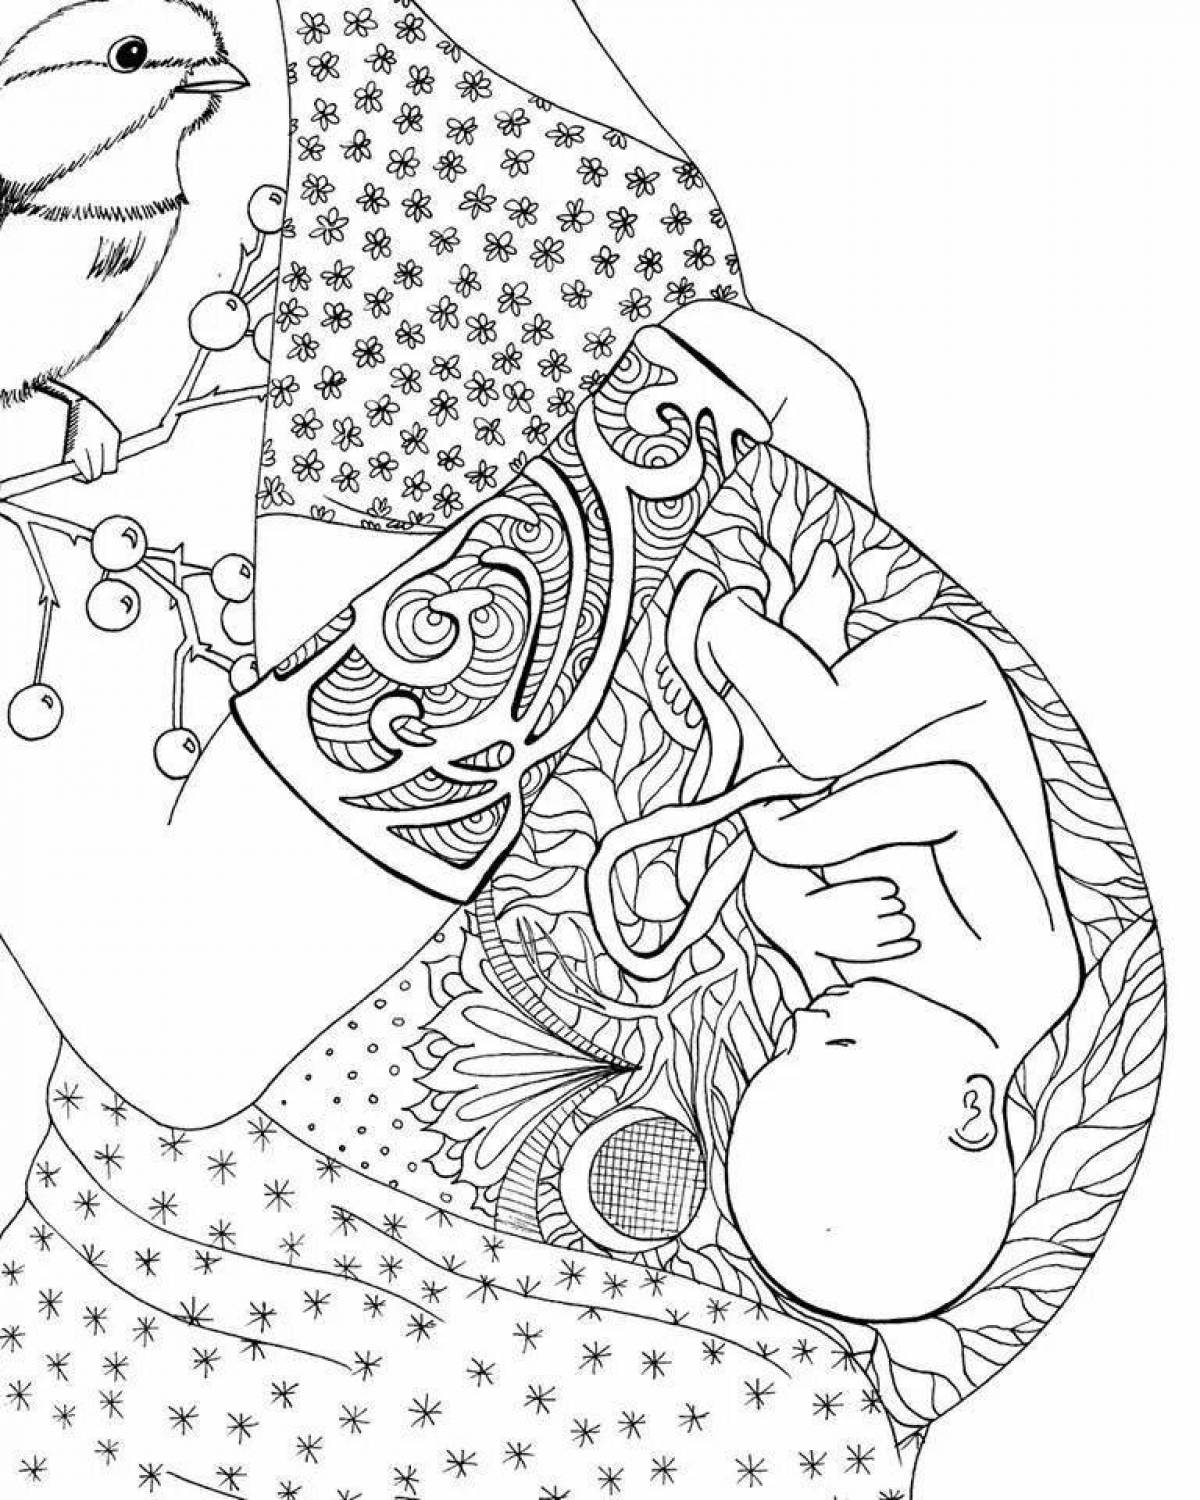 Sharp pregnancy coloring page